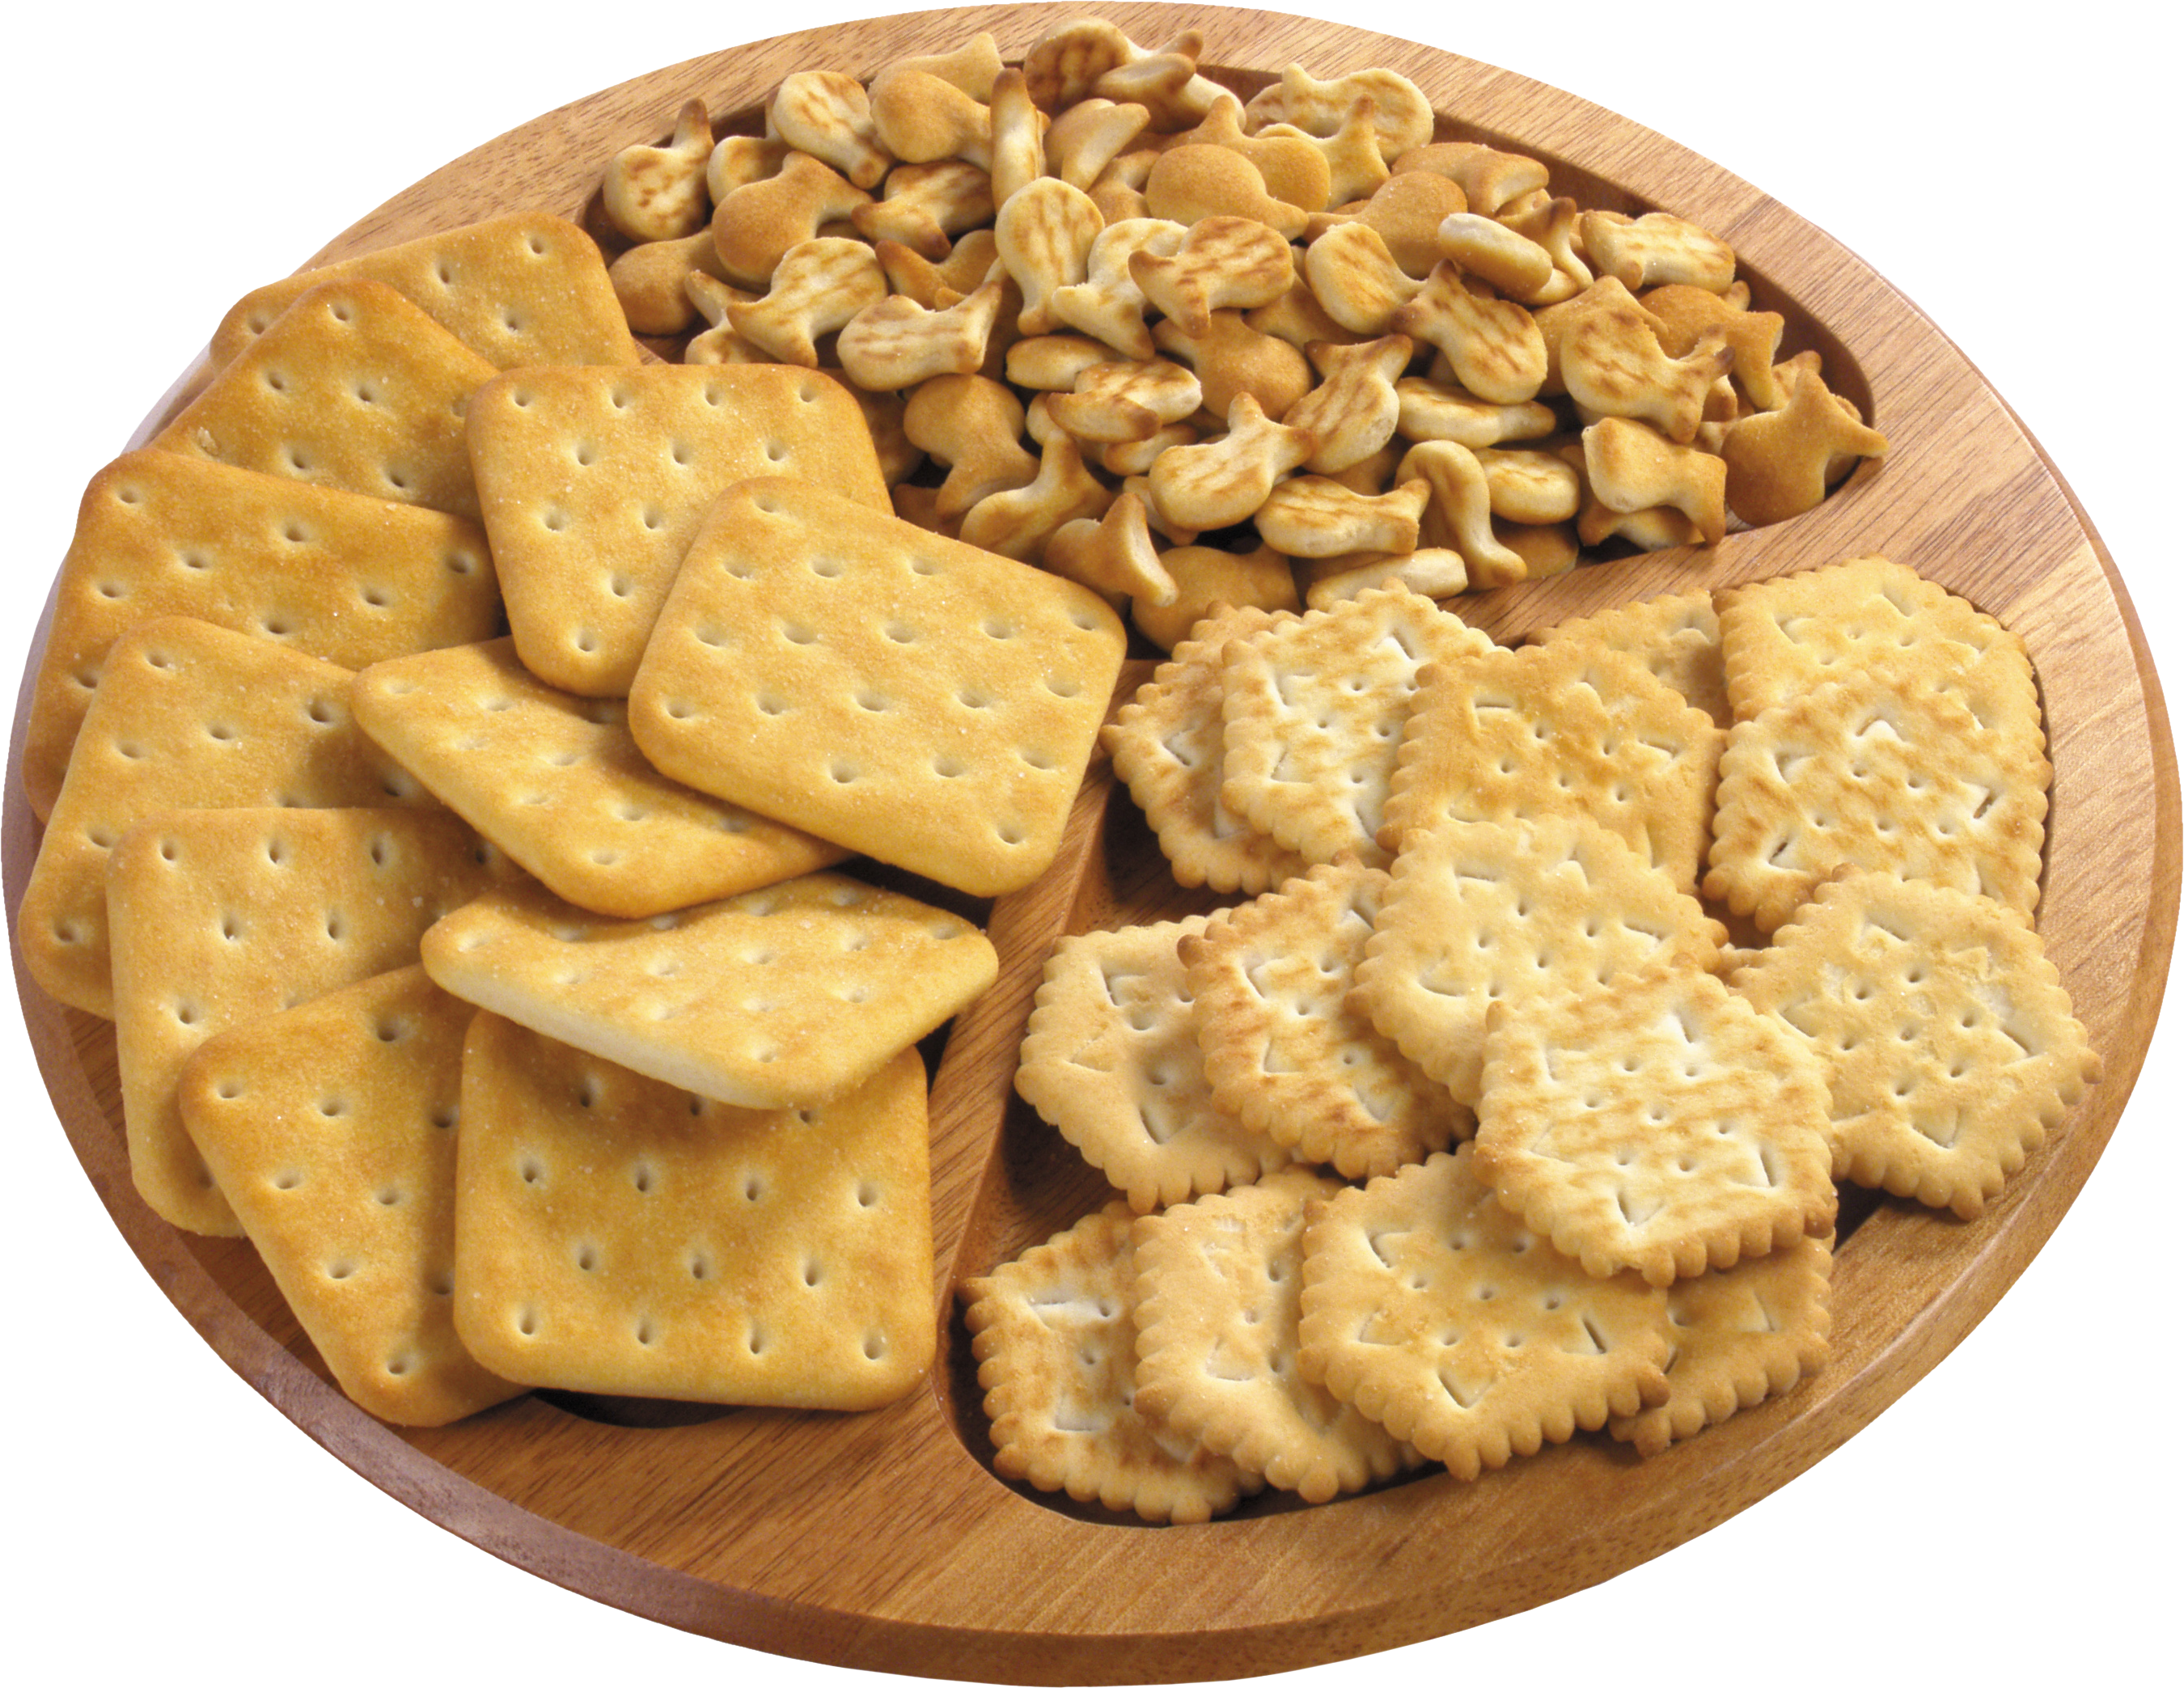 Snacks PNG Image - PurePNG | Free transparent CC0 PNG Image Library